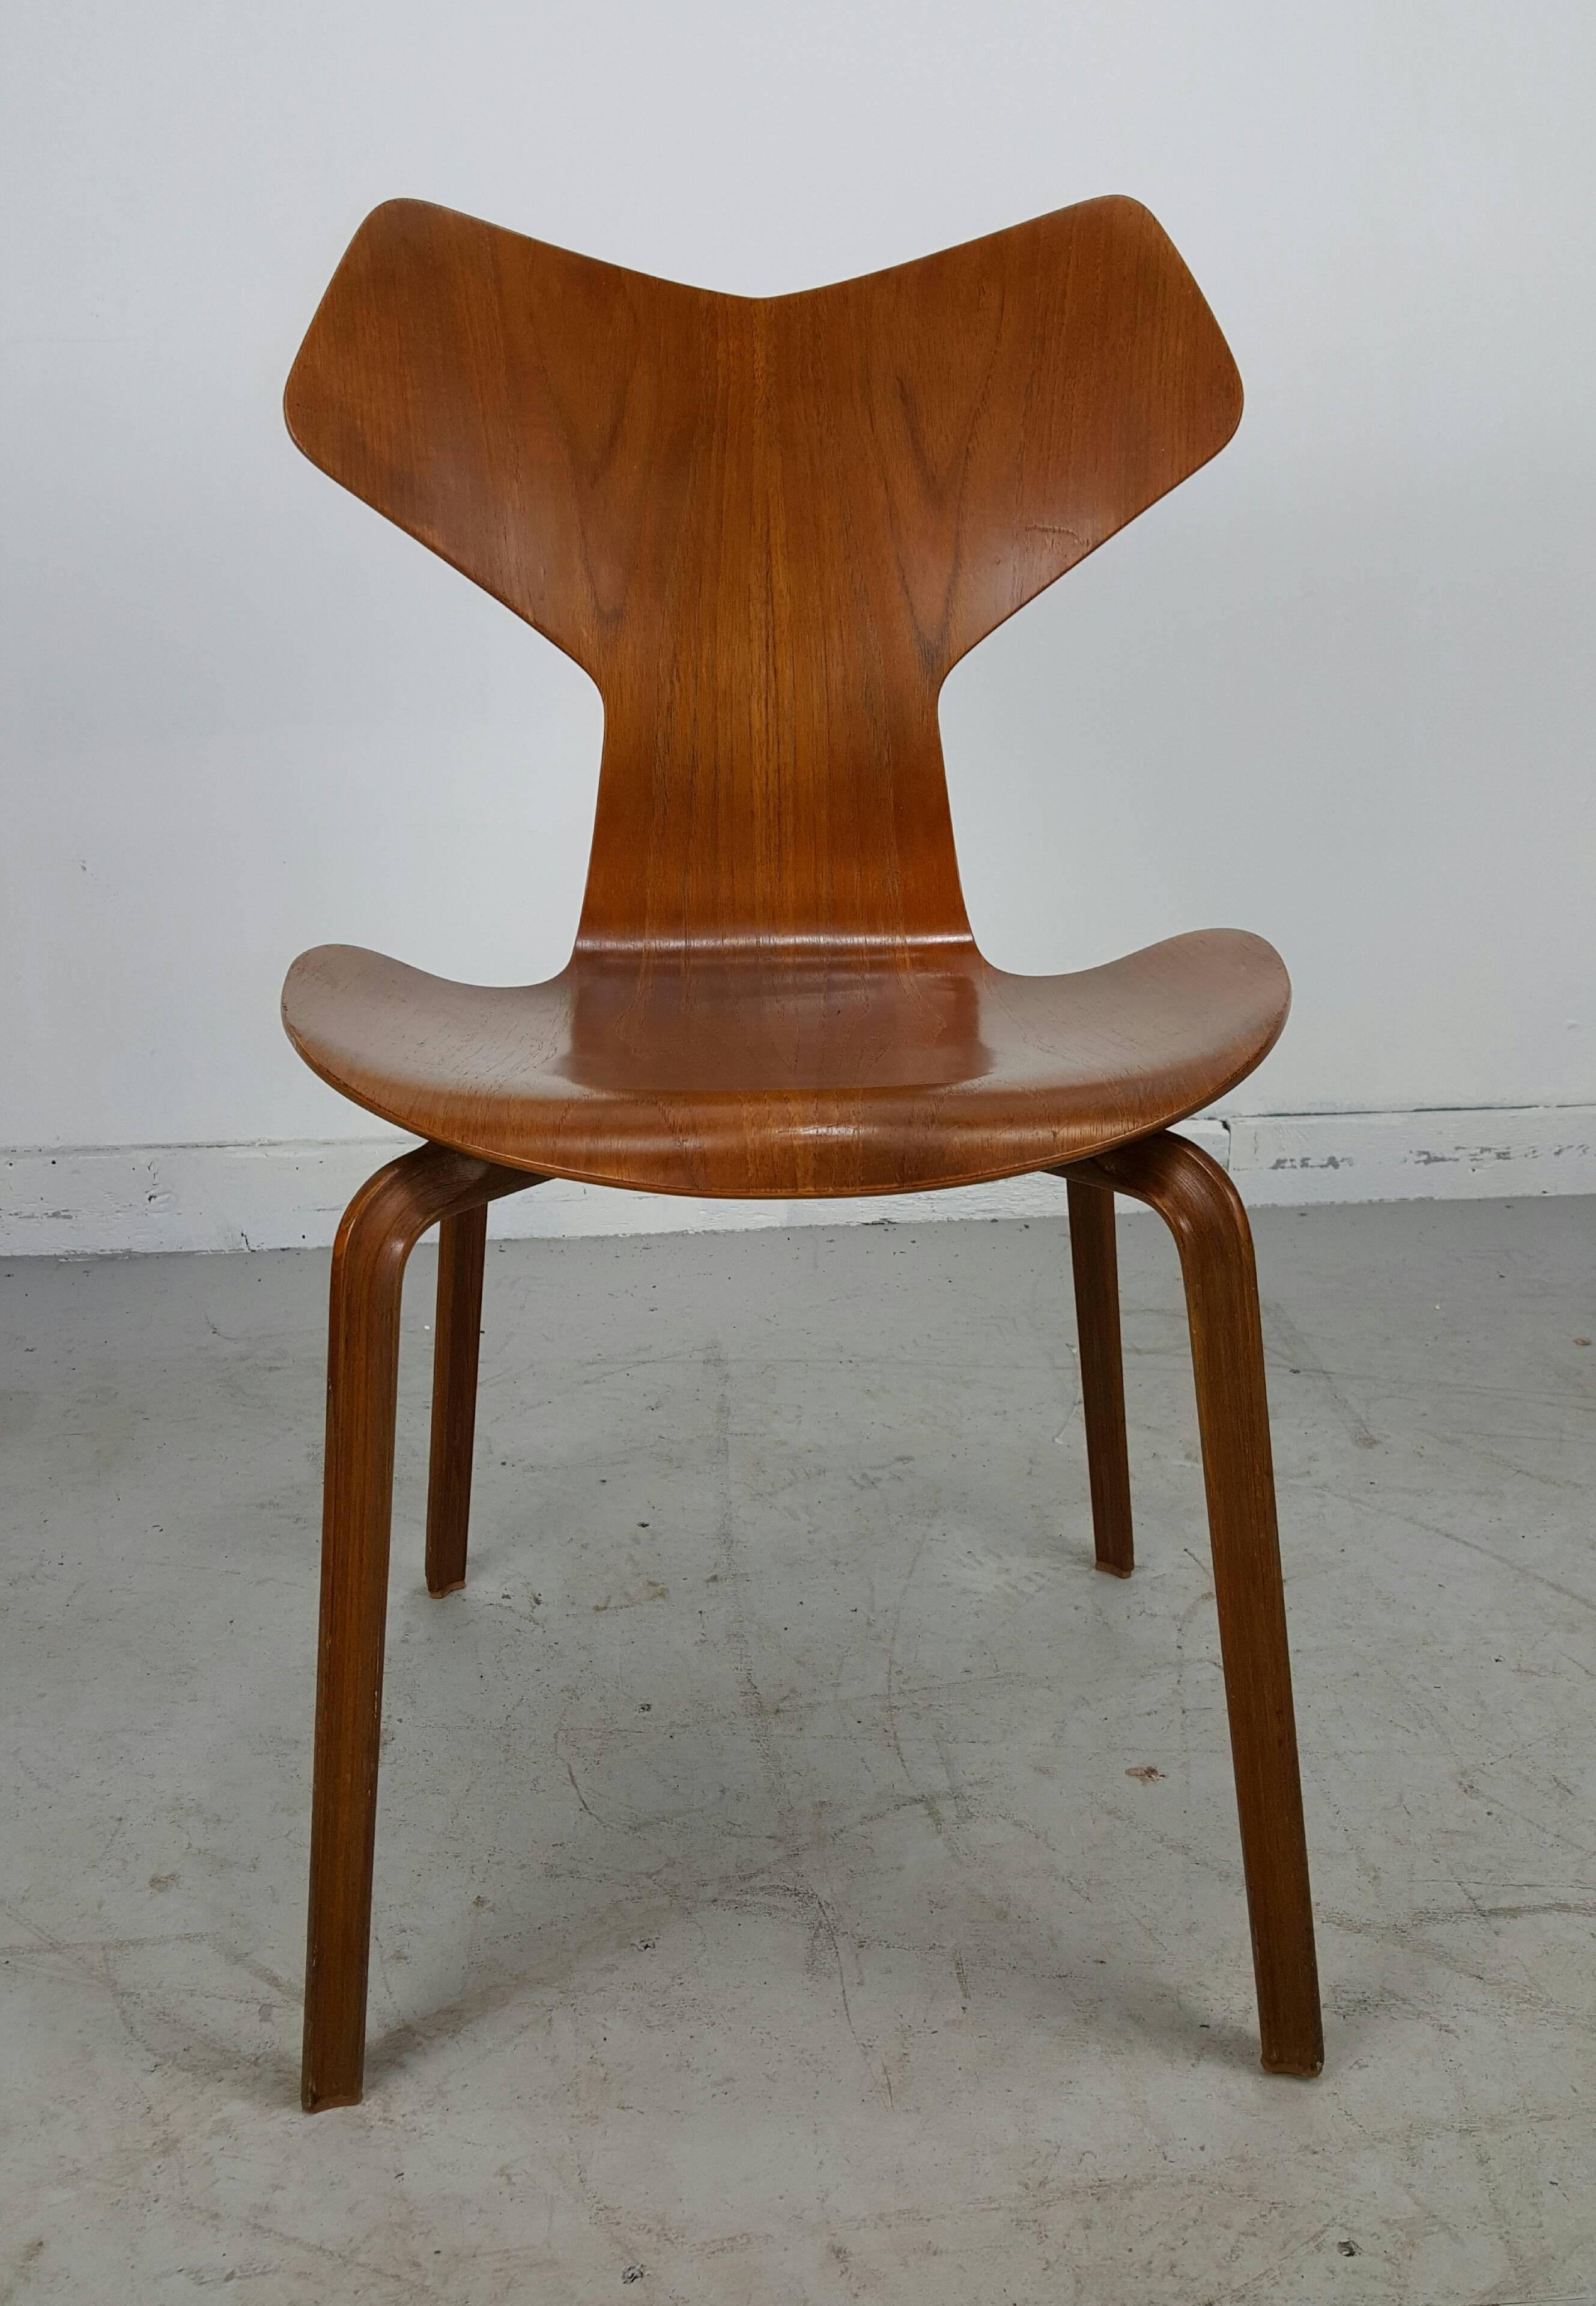 The Grand Prix is a stackable plywood chair, designed by the Danish architect and designer Arne Jacobsen in 1957 and presented at the Spring Exhibition of Danish arts and crafts at the Danish Museum of Art & Design in Copenhagen.

Originally known